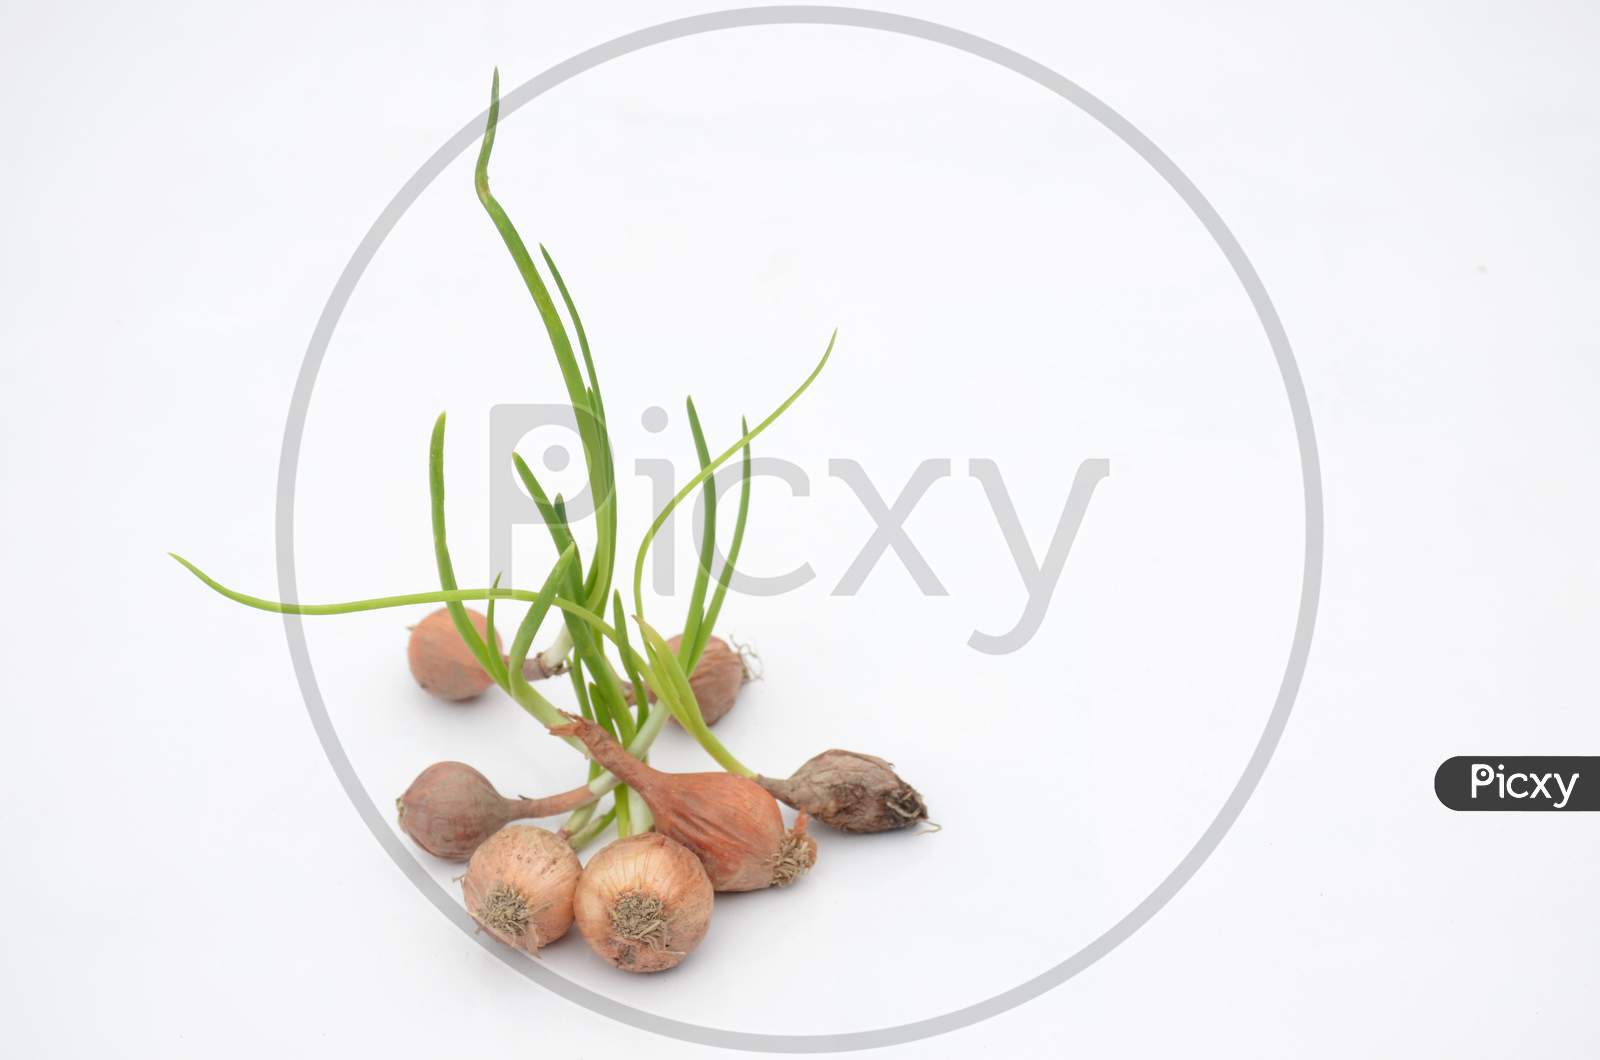 The Bunch Red Green Onion Soil Heap Isolated On White Background.